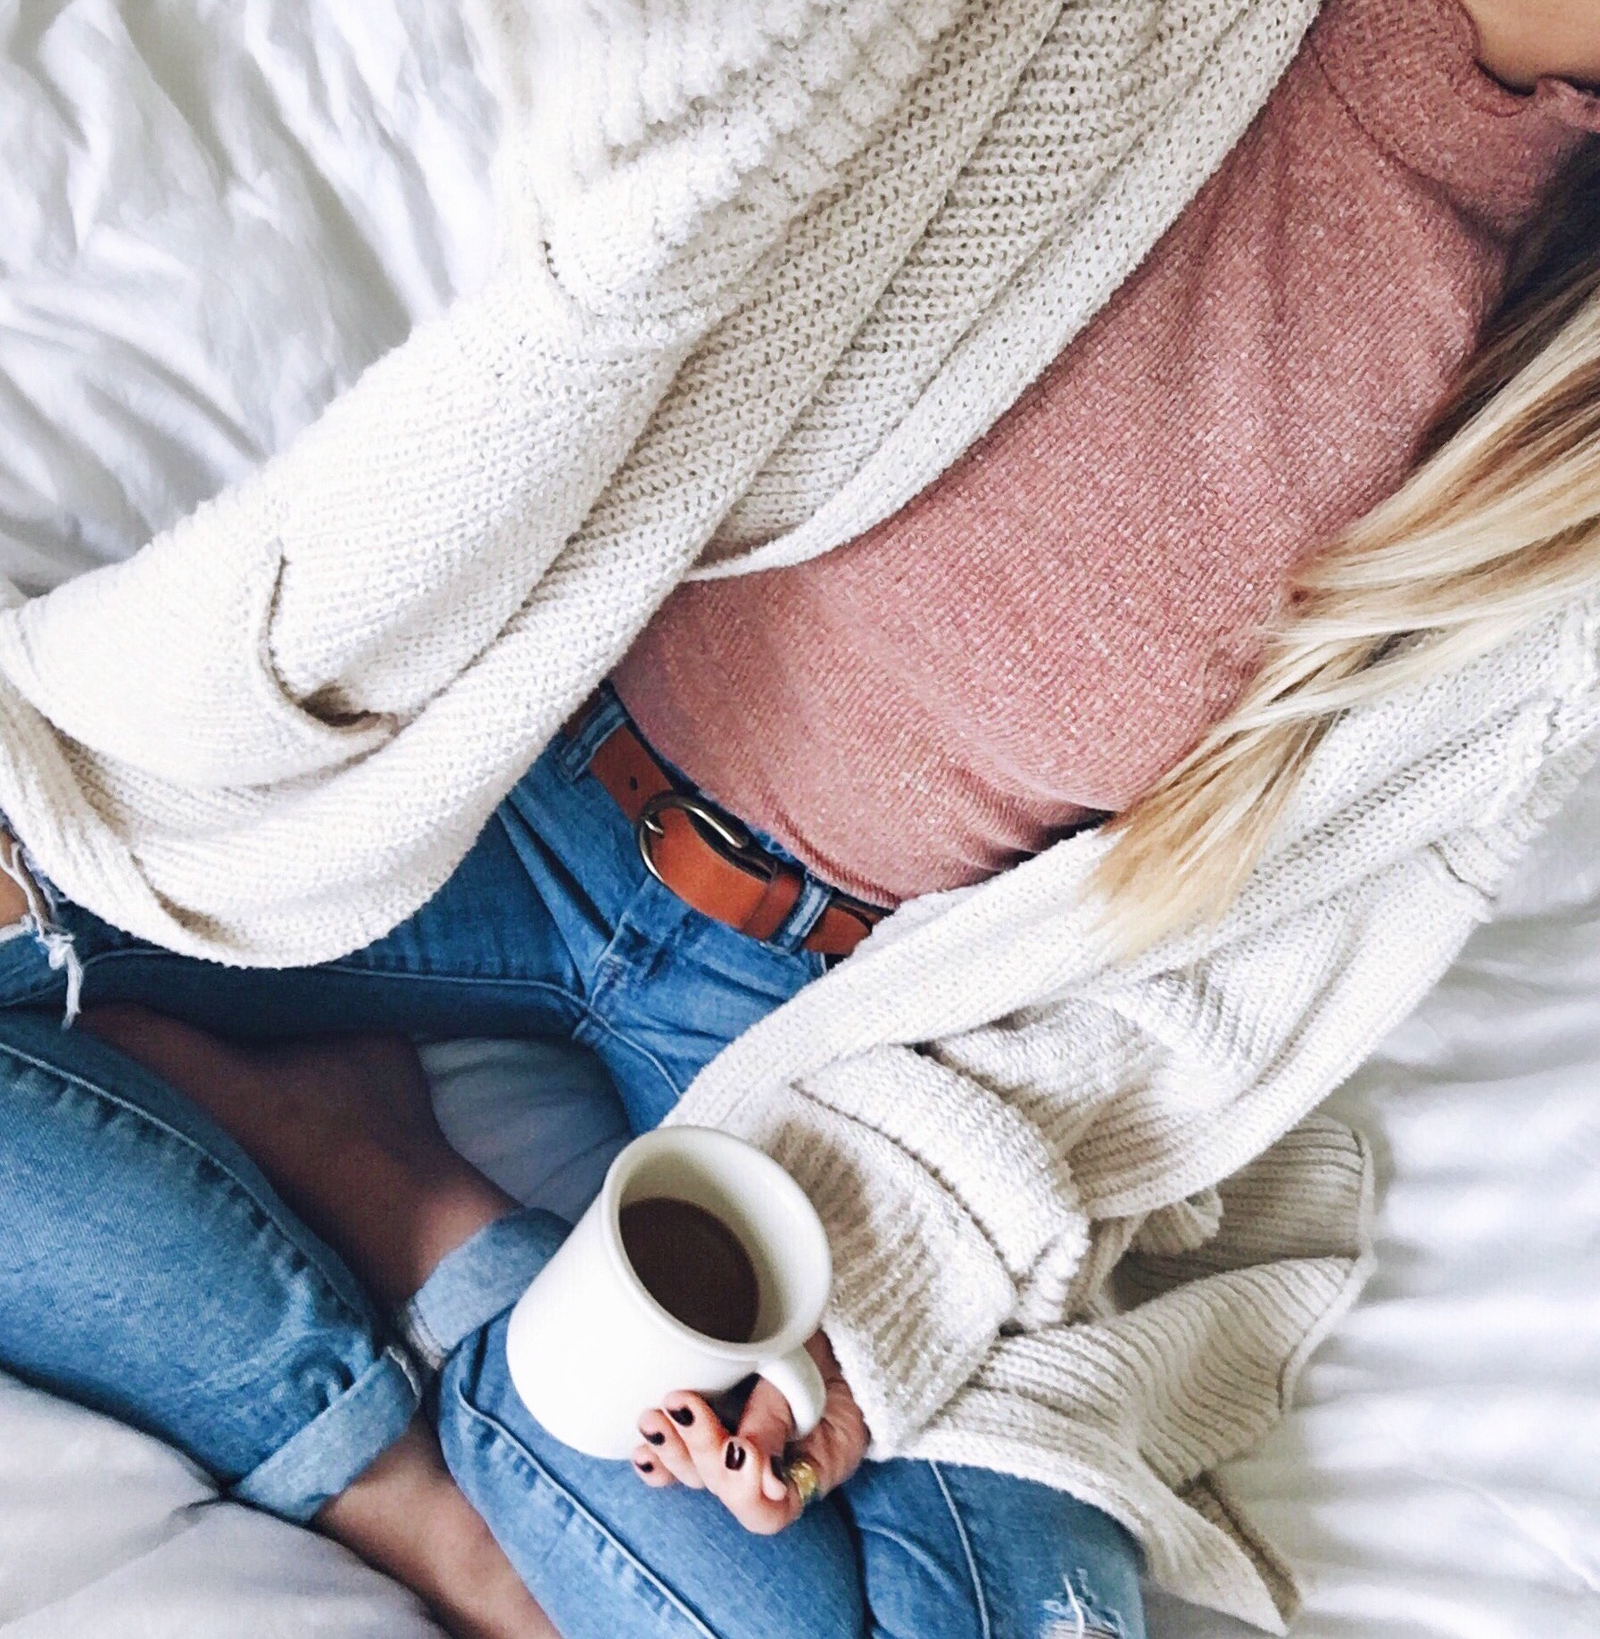 livvyland-blog-olivia-watson-instagram-roundup-austin-texas-cozy-winter-outfit-coffee-in-bed